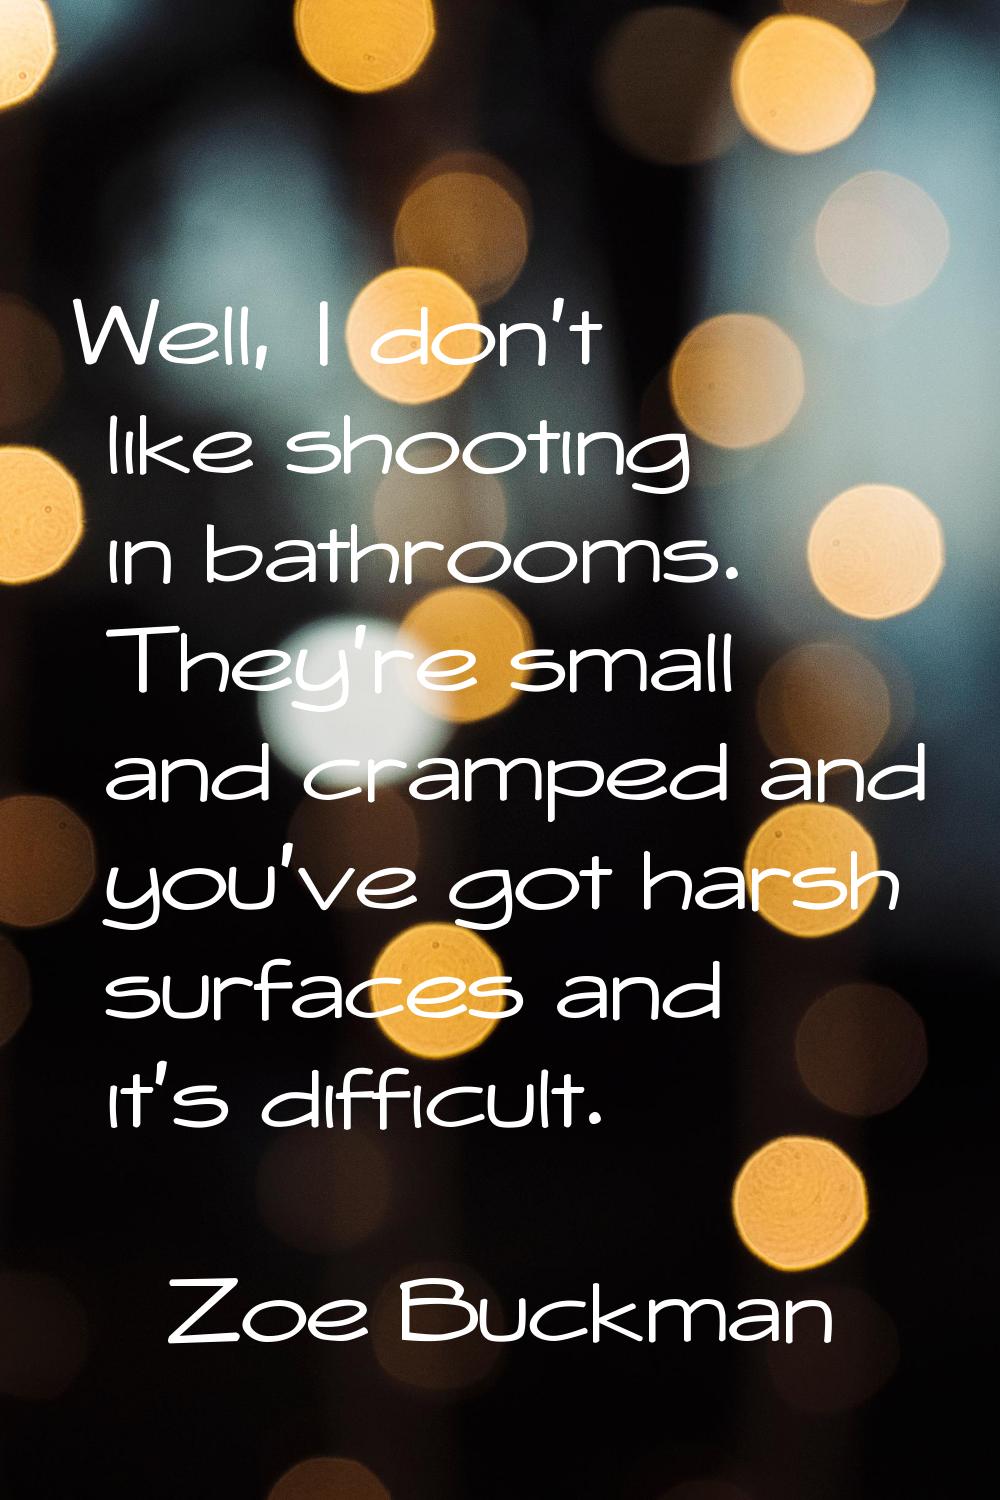 Well, I don't like shooting in bathrooms. They're small and cramped and you've got harsh surfaces a